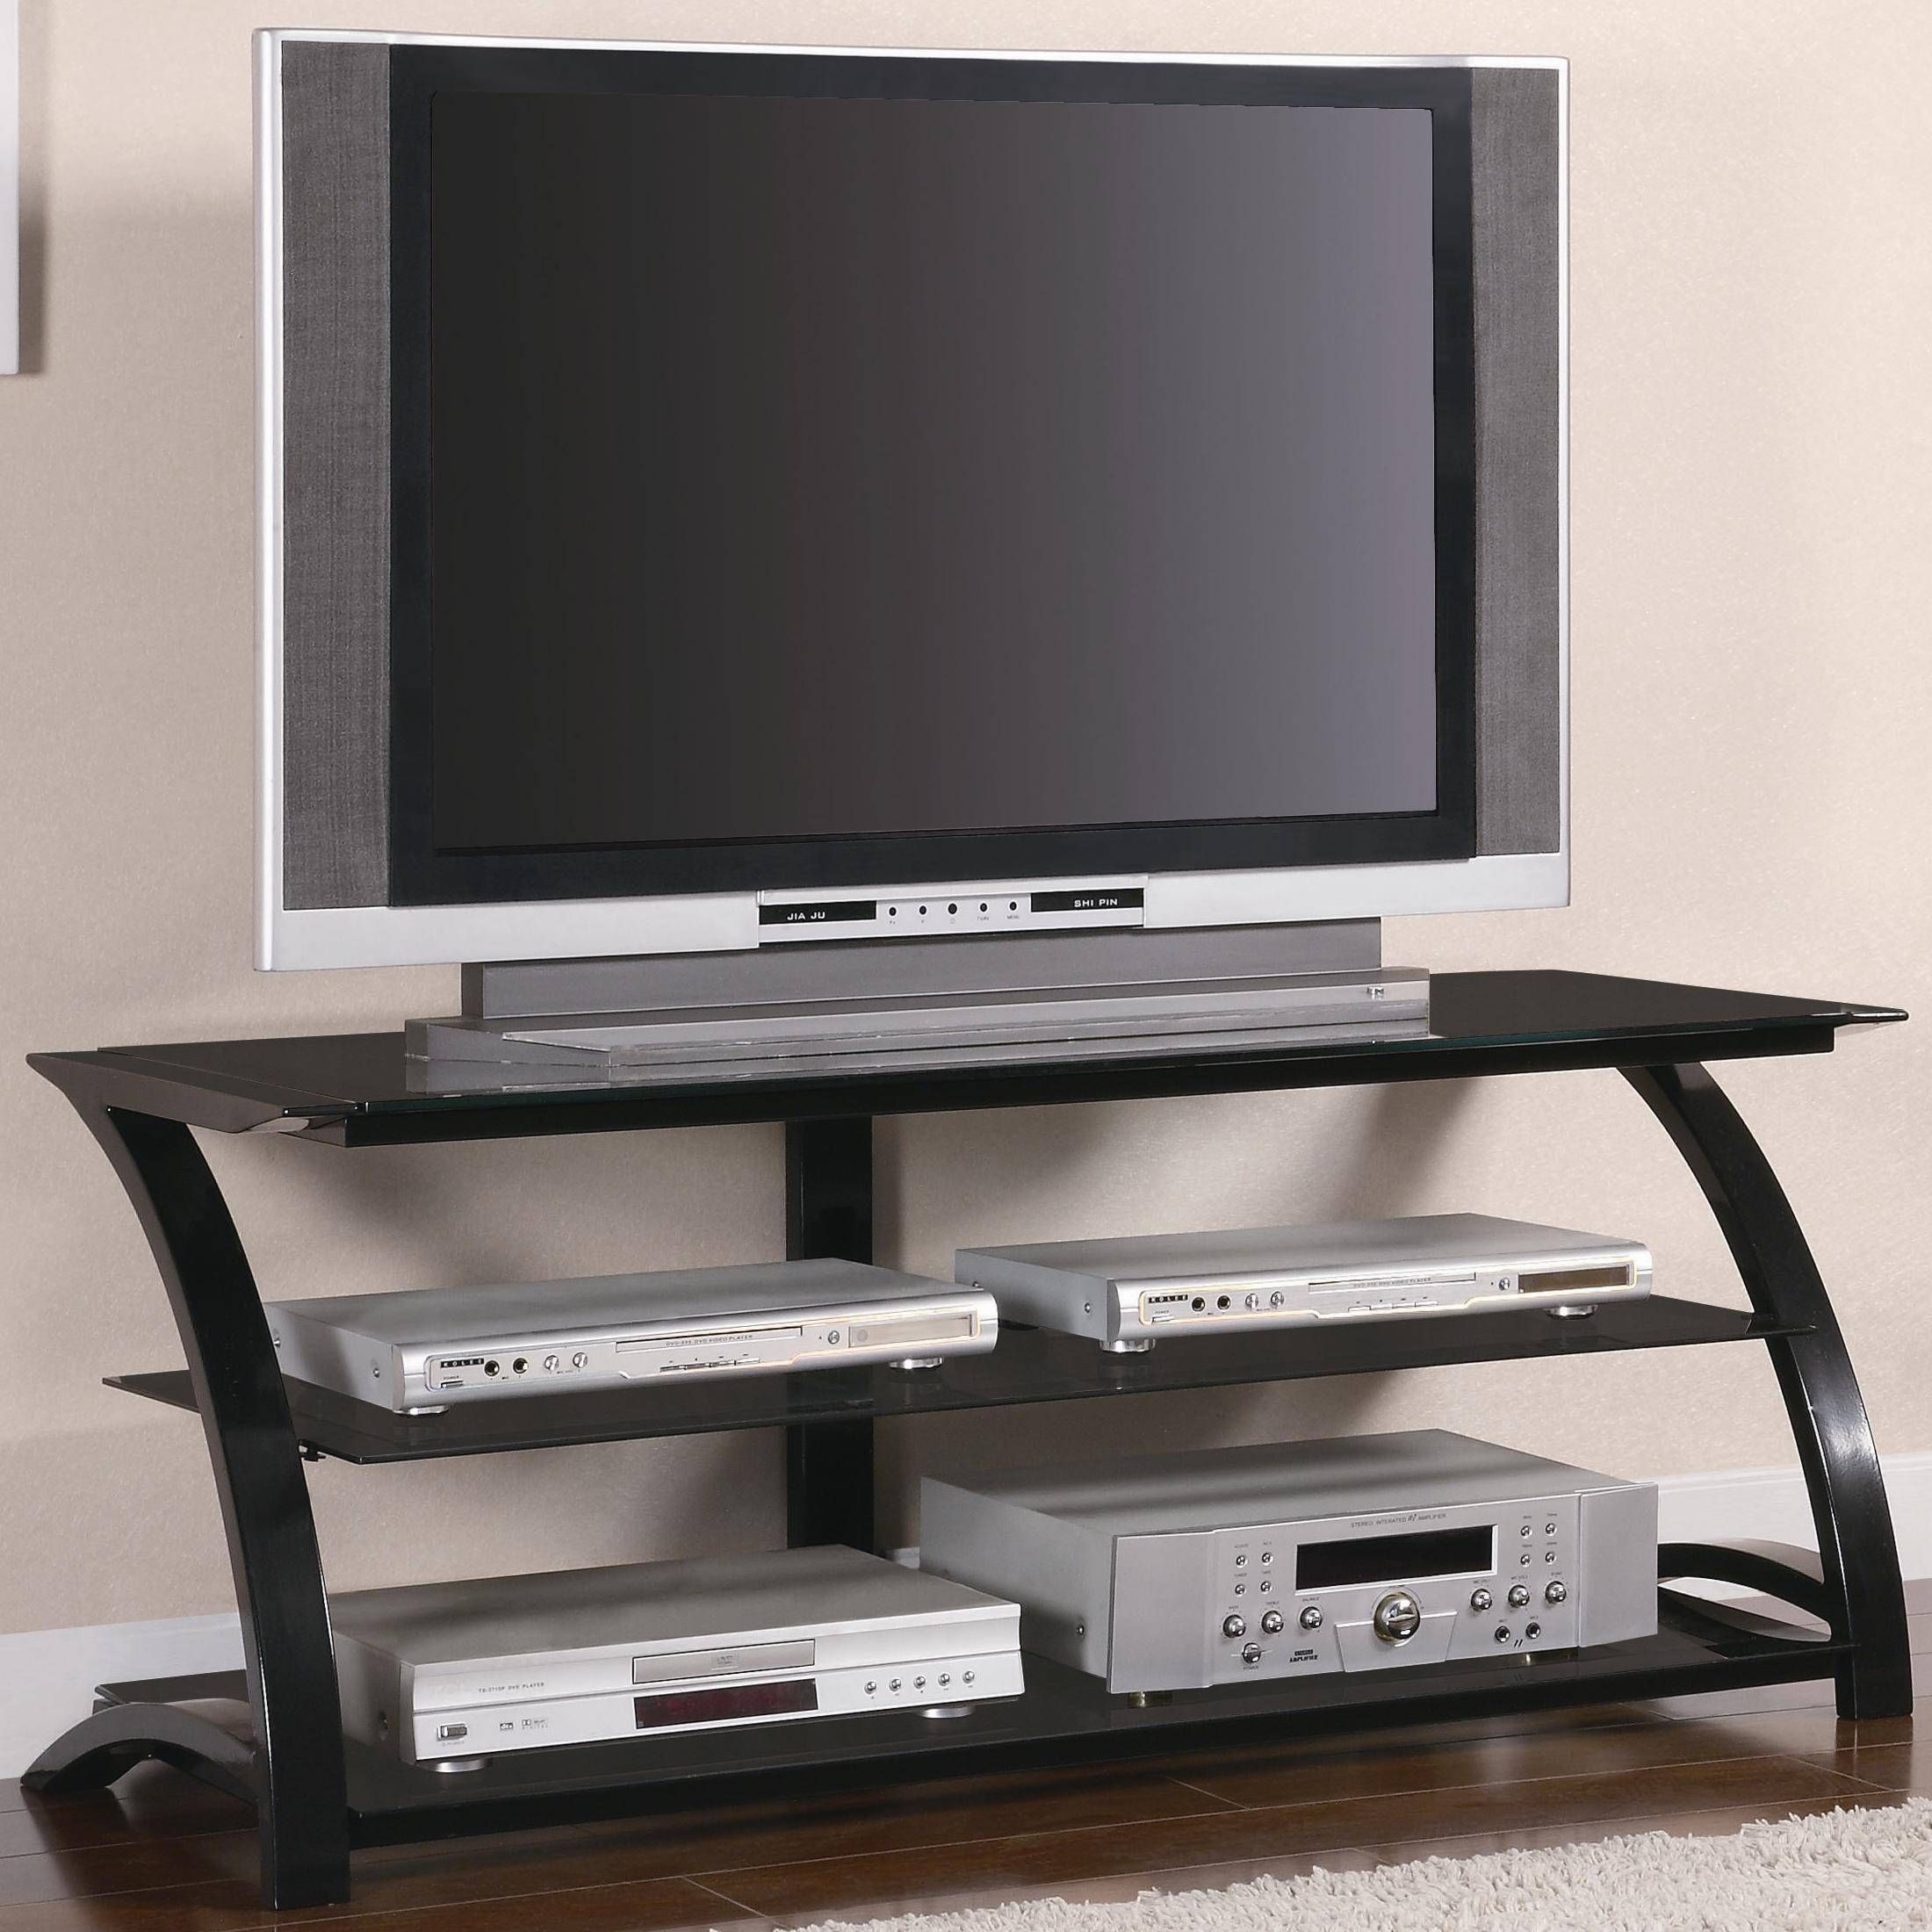 Furniture. Wonderful Design Of Wooden Tv Stands With Mount To Intended For Rectangular Tv Stands (Photo 15 of 15)